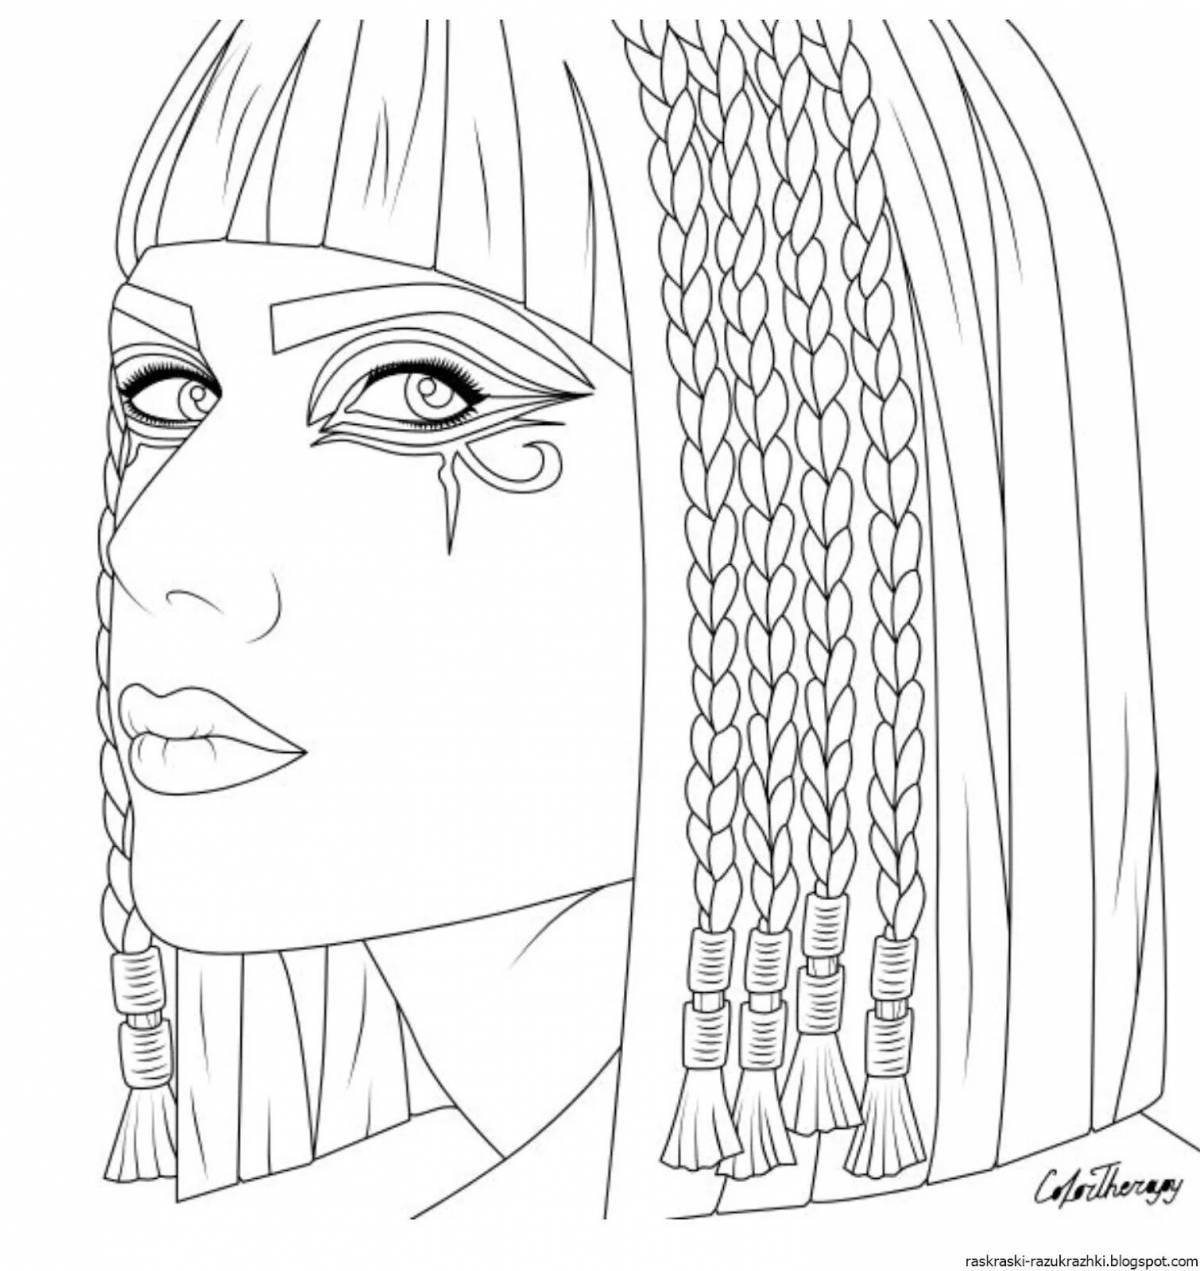 Playful makeup coloring page for girls